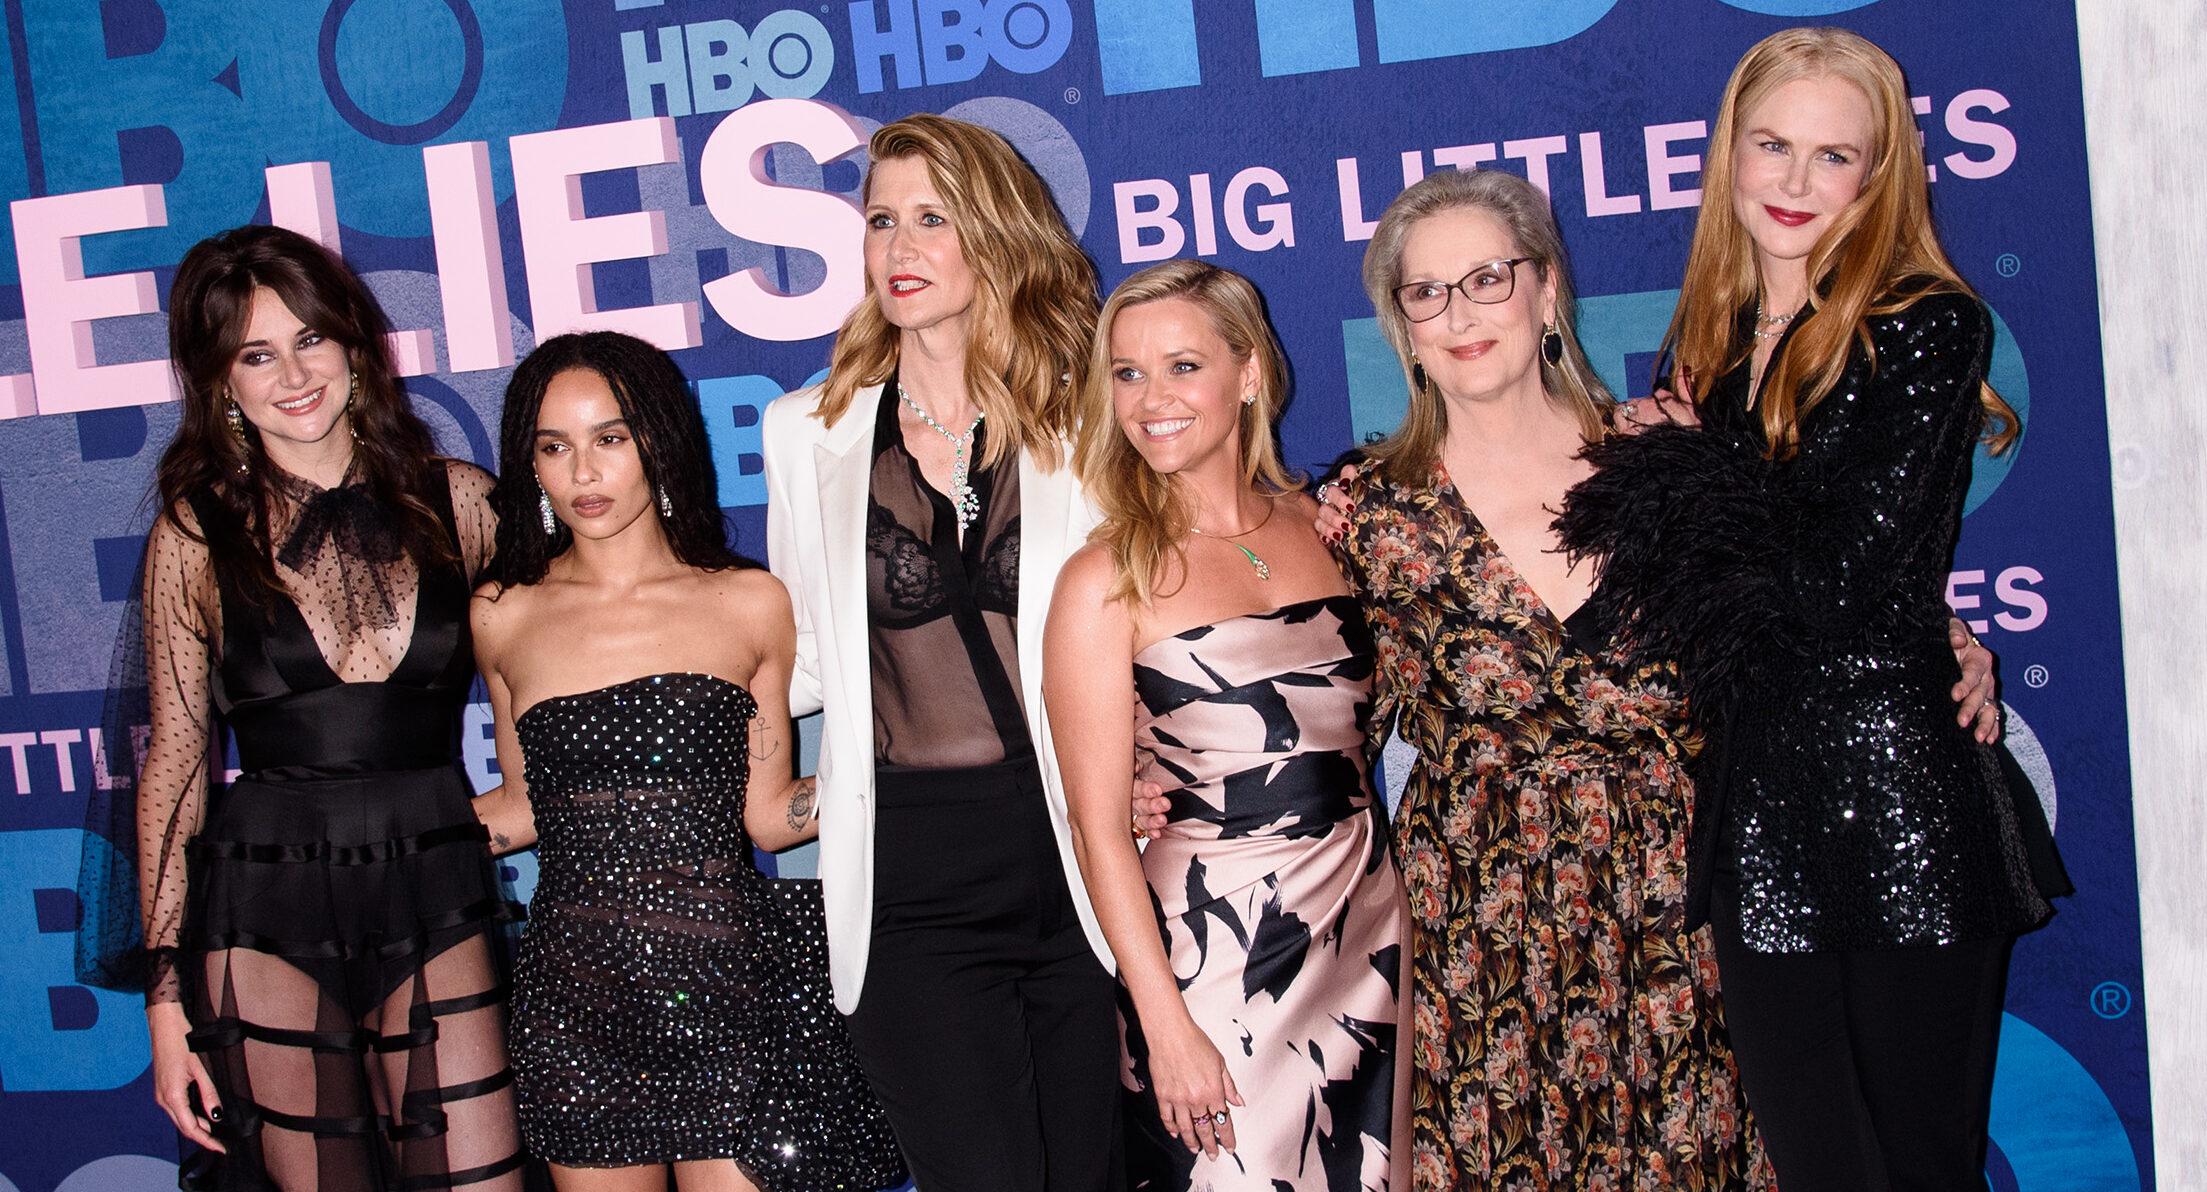 HBO's Big Little Lies Season 2 Premiere Jazz at Lincoln Center, NY. 29 May 2019 Pictured: Shailene Woodley, Zoe Kravitz, Laura Dern, Reese Witherspoon, Meryl Streep, Nicole Kidman.